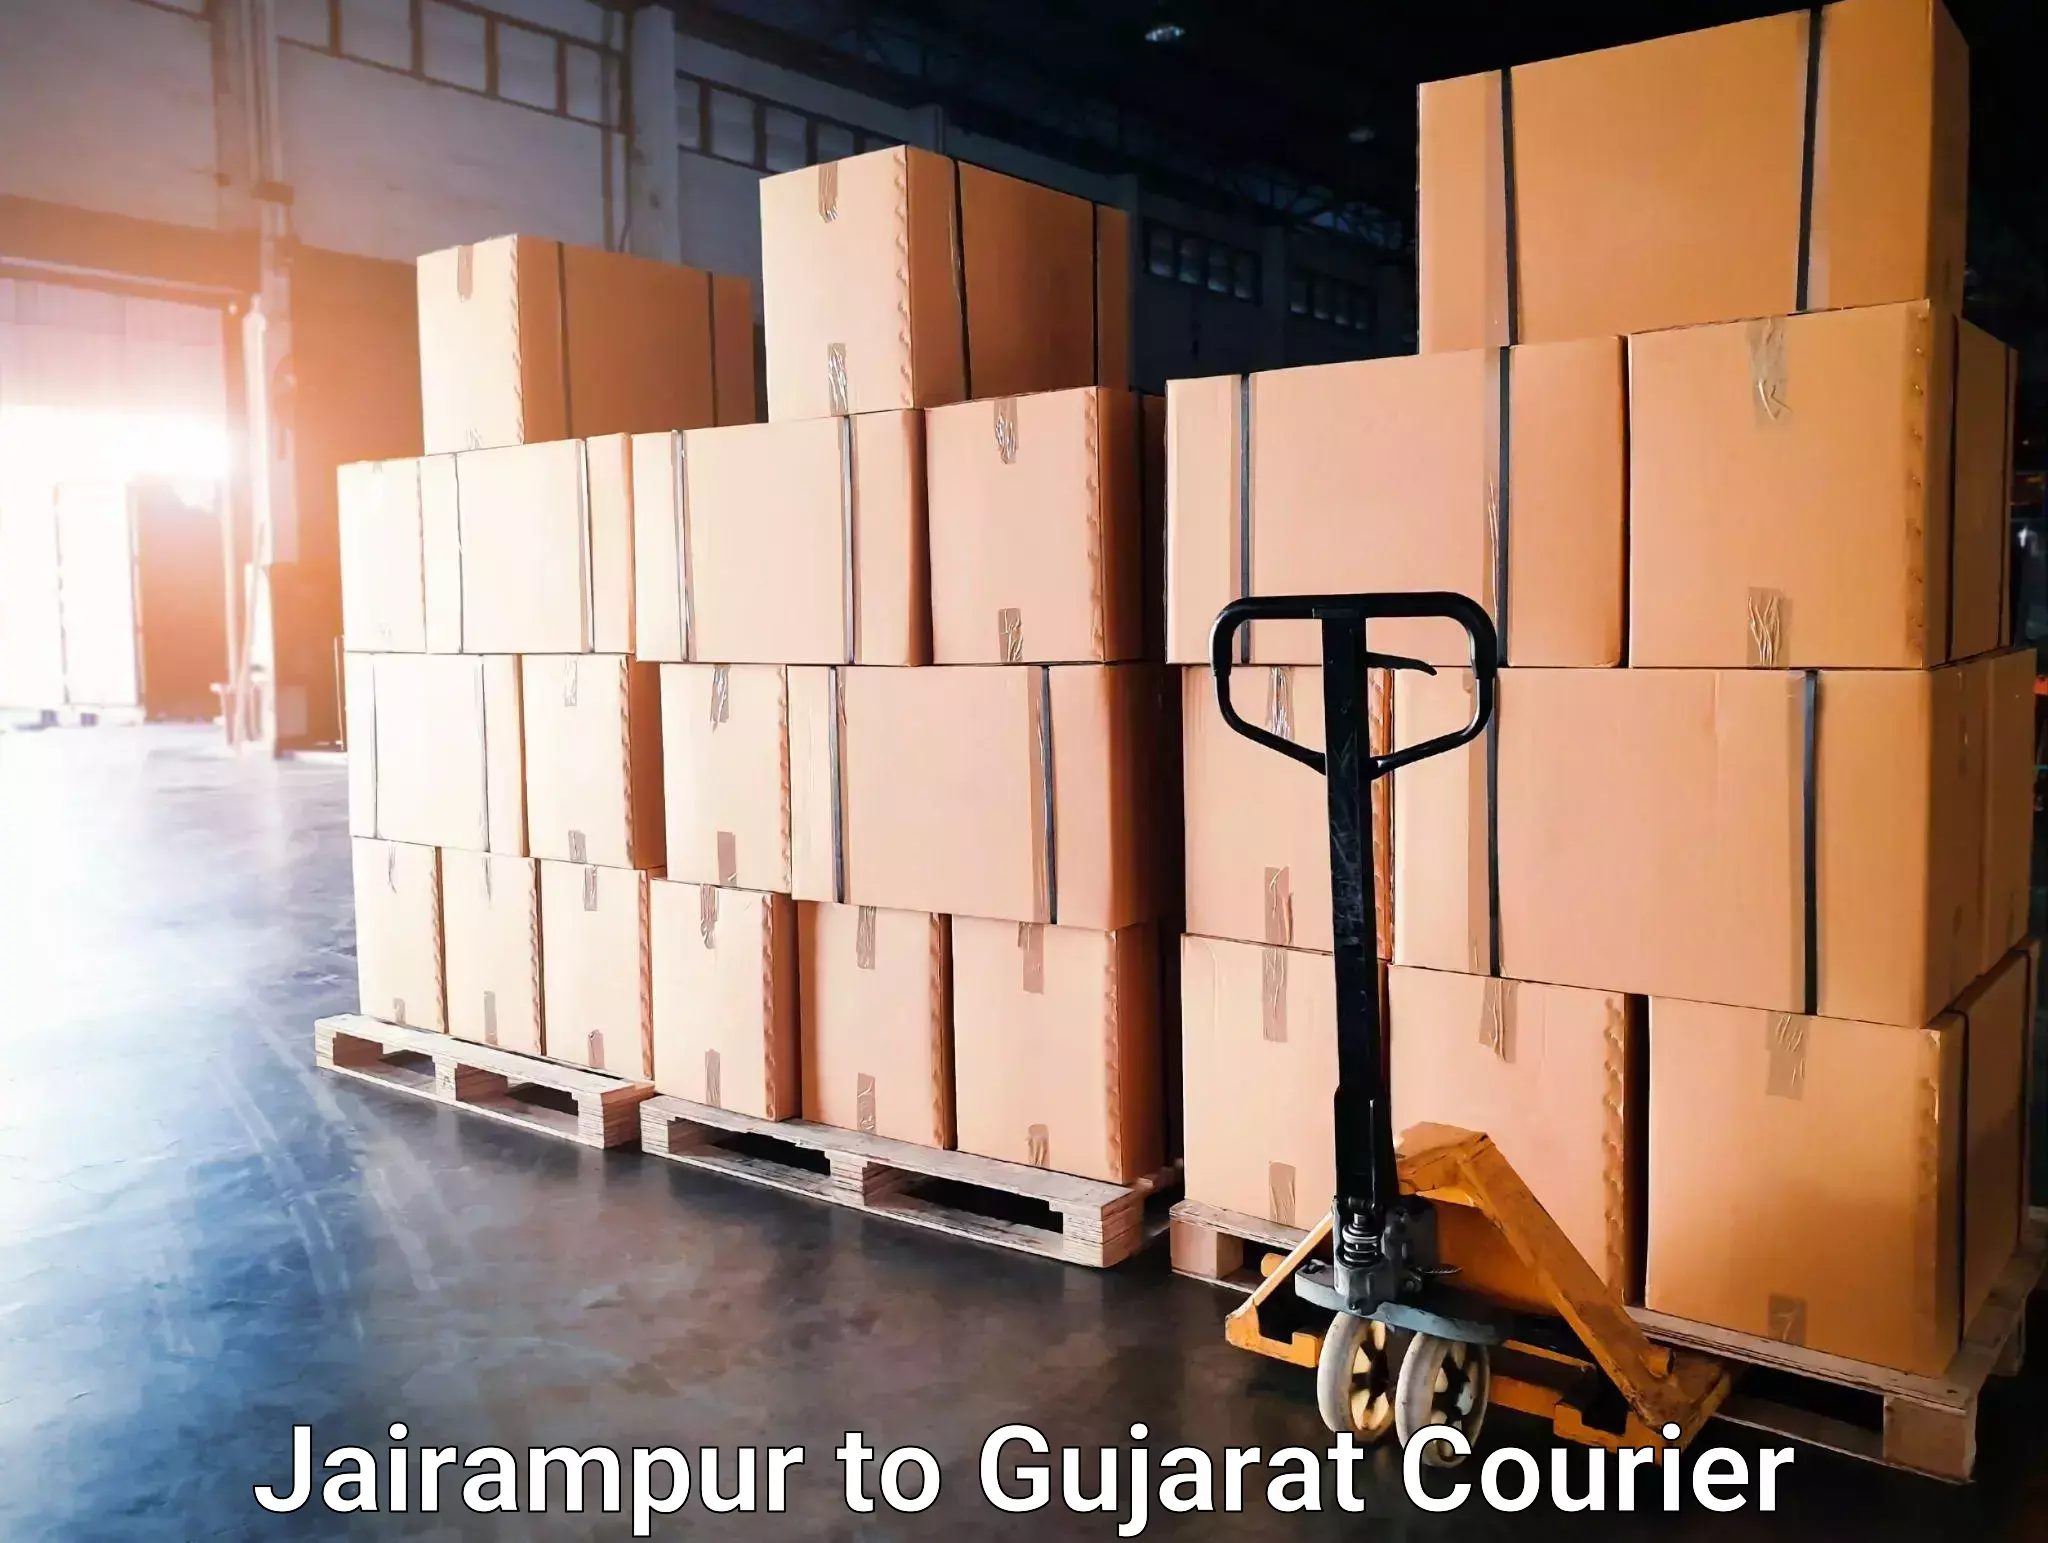 Courier service efficiency Jairampur to Songadh